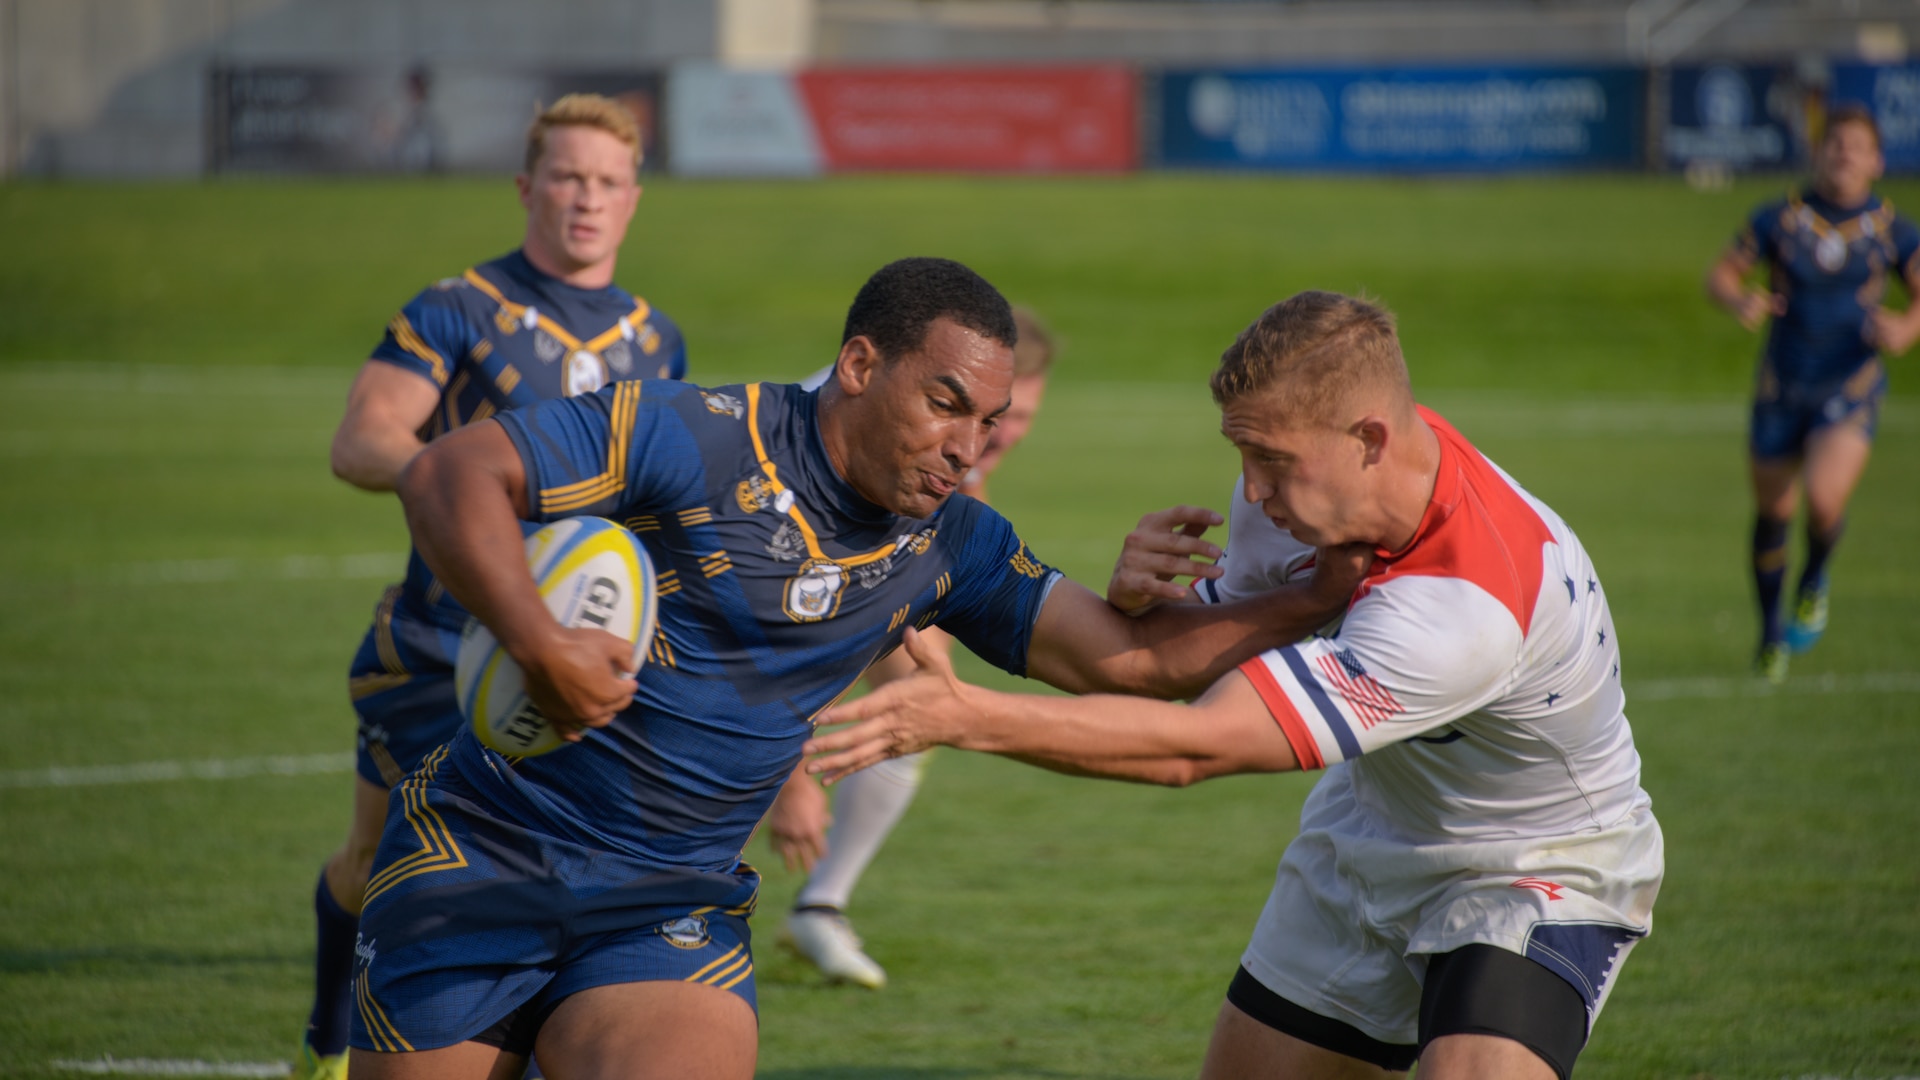 2018 Armed Forces Rugby Championship